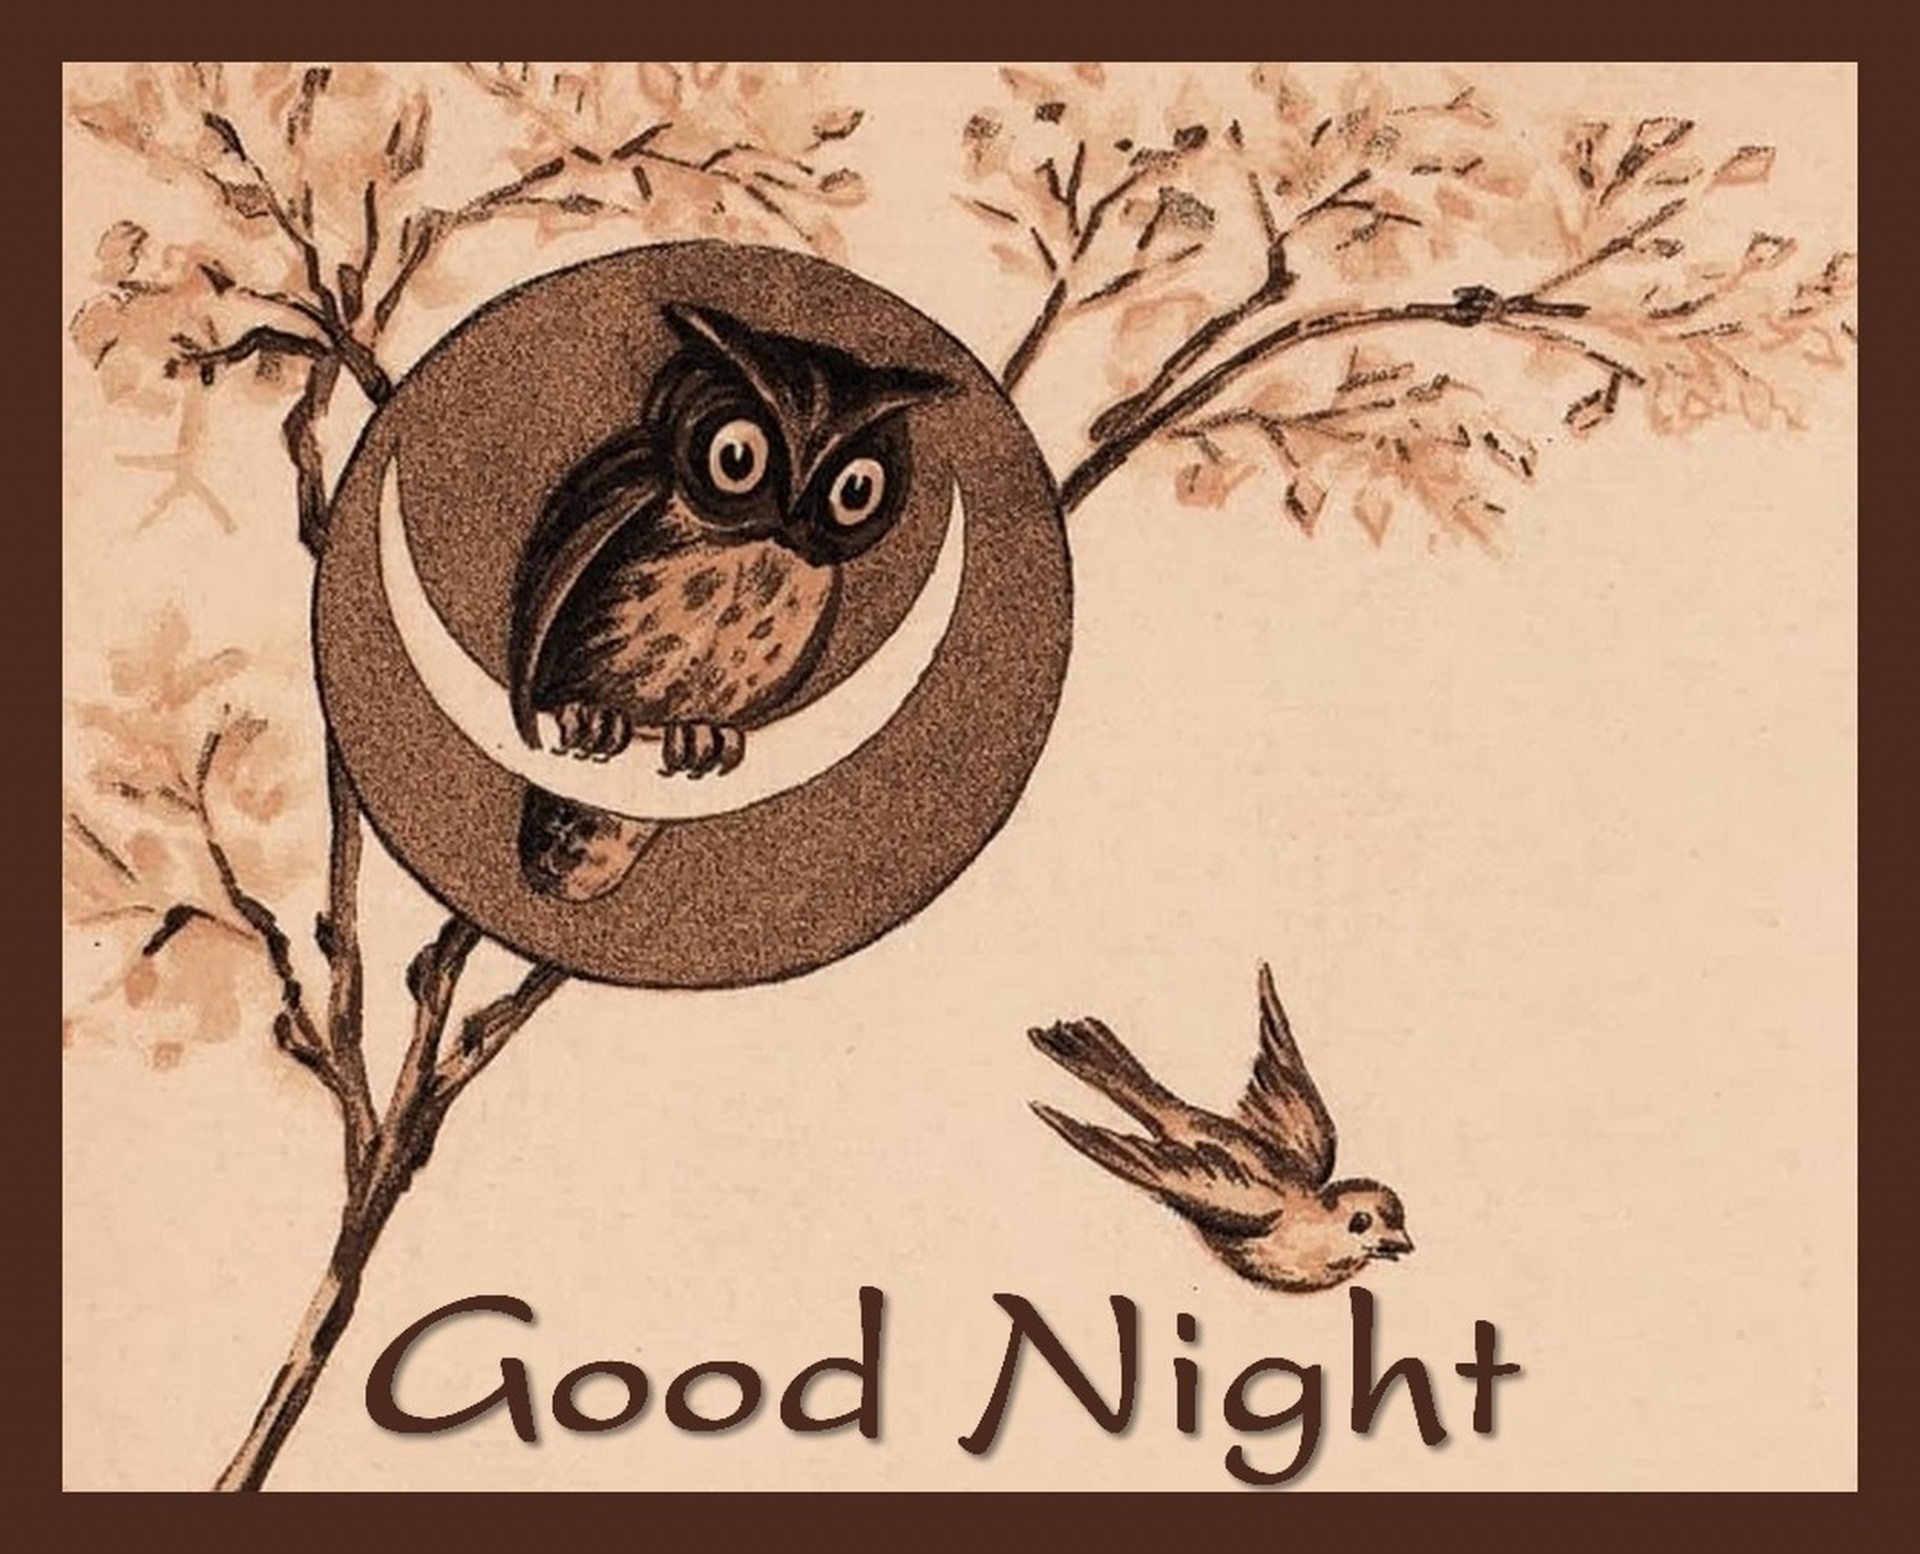 Remix of an old royalty-free drawing of an owl and her cub with the words GOOD NIGHT in shades of beige and brown